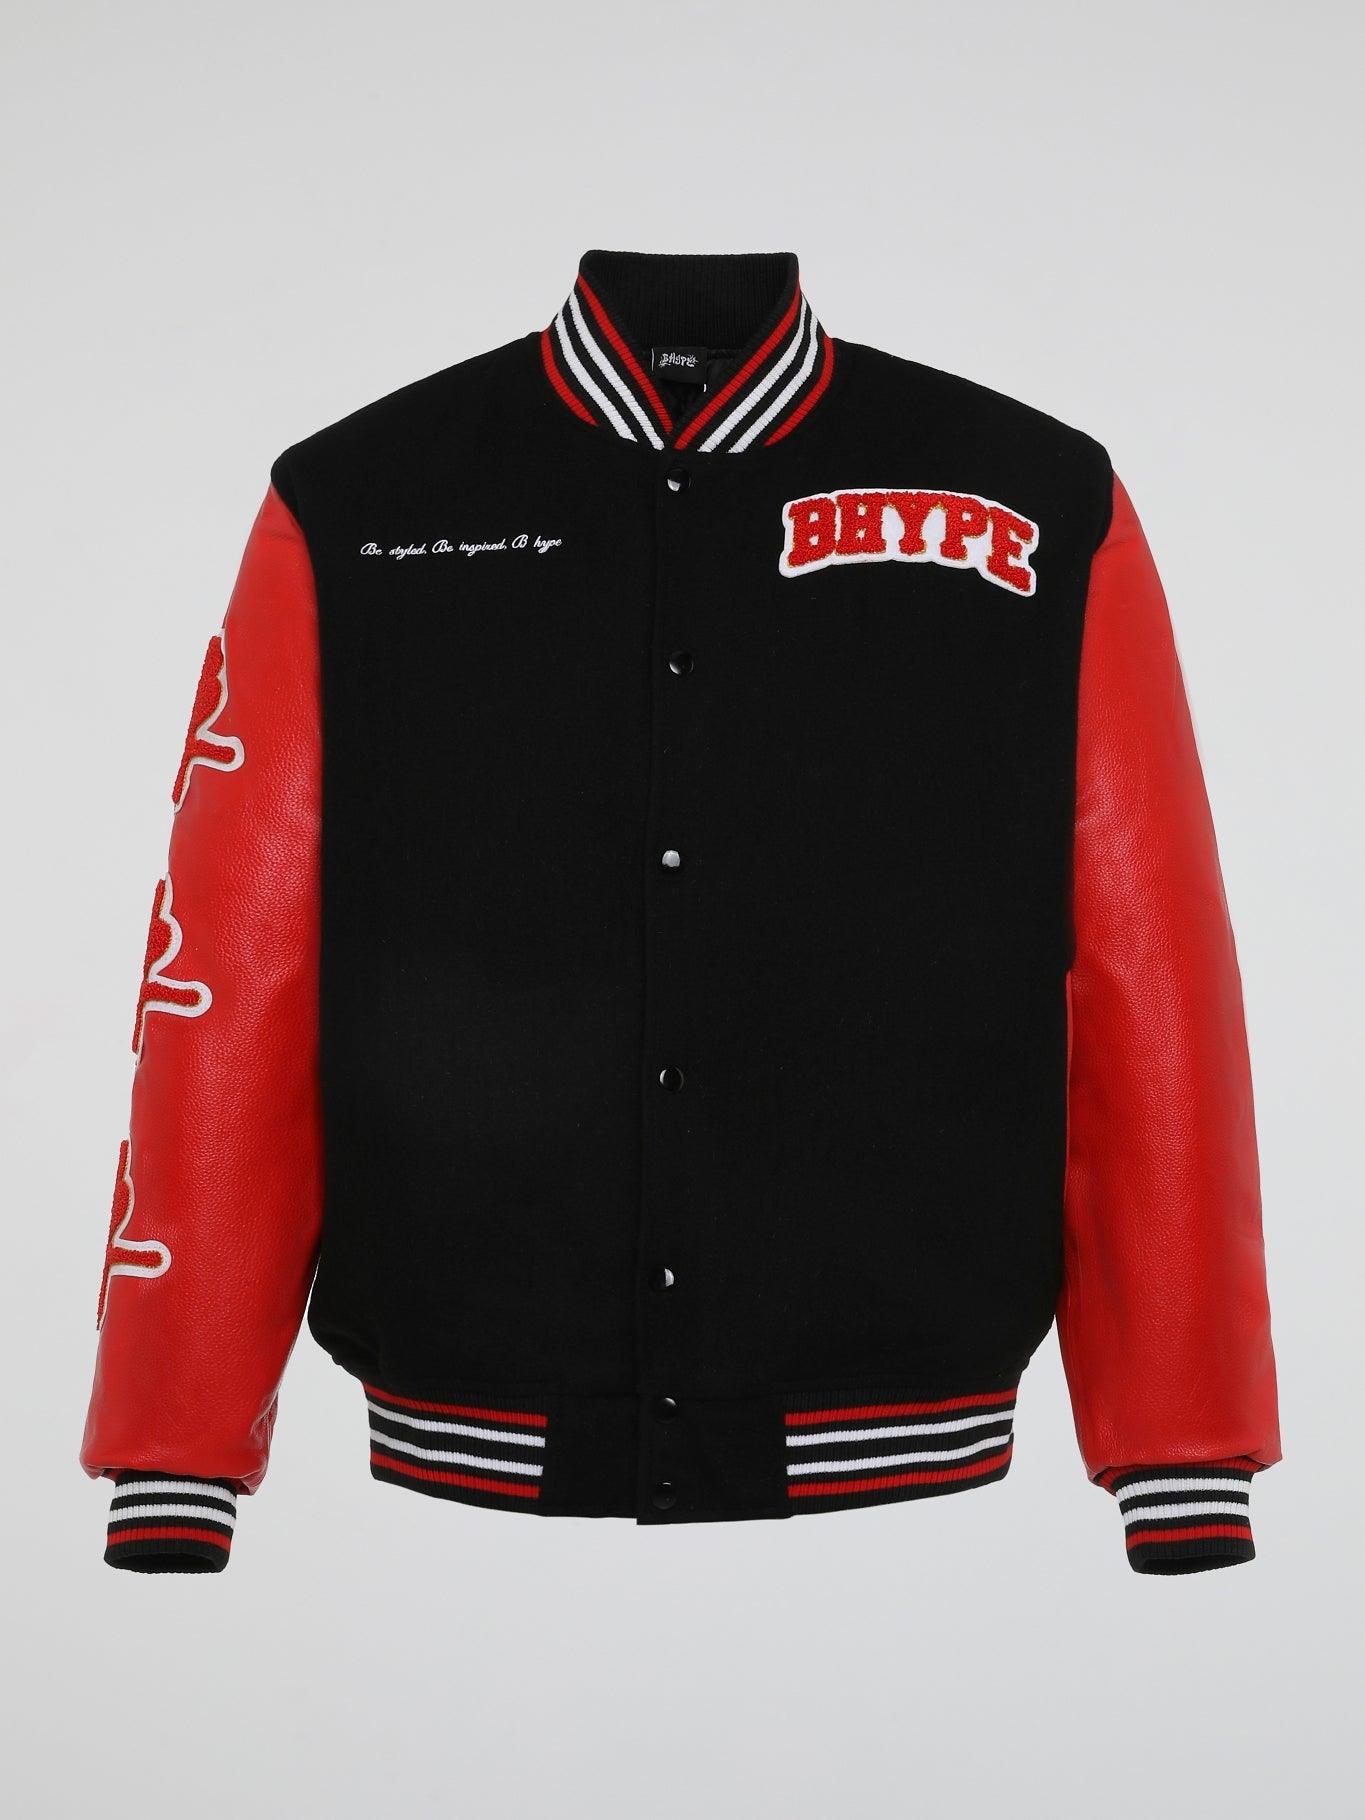 BHYPE VARSITY COLLECTION JACKET BLACK/RED - B-Hype Society